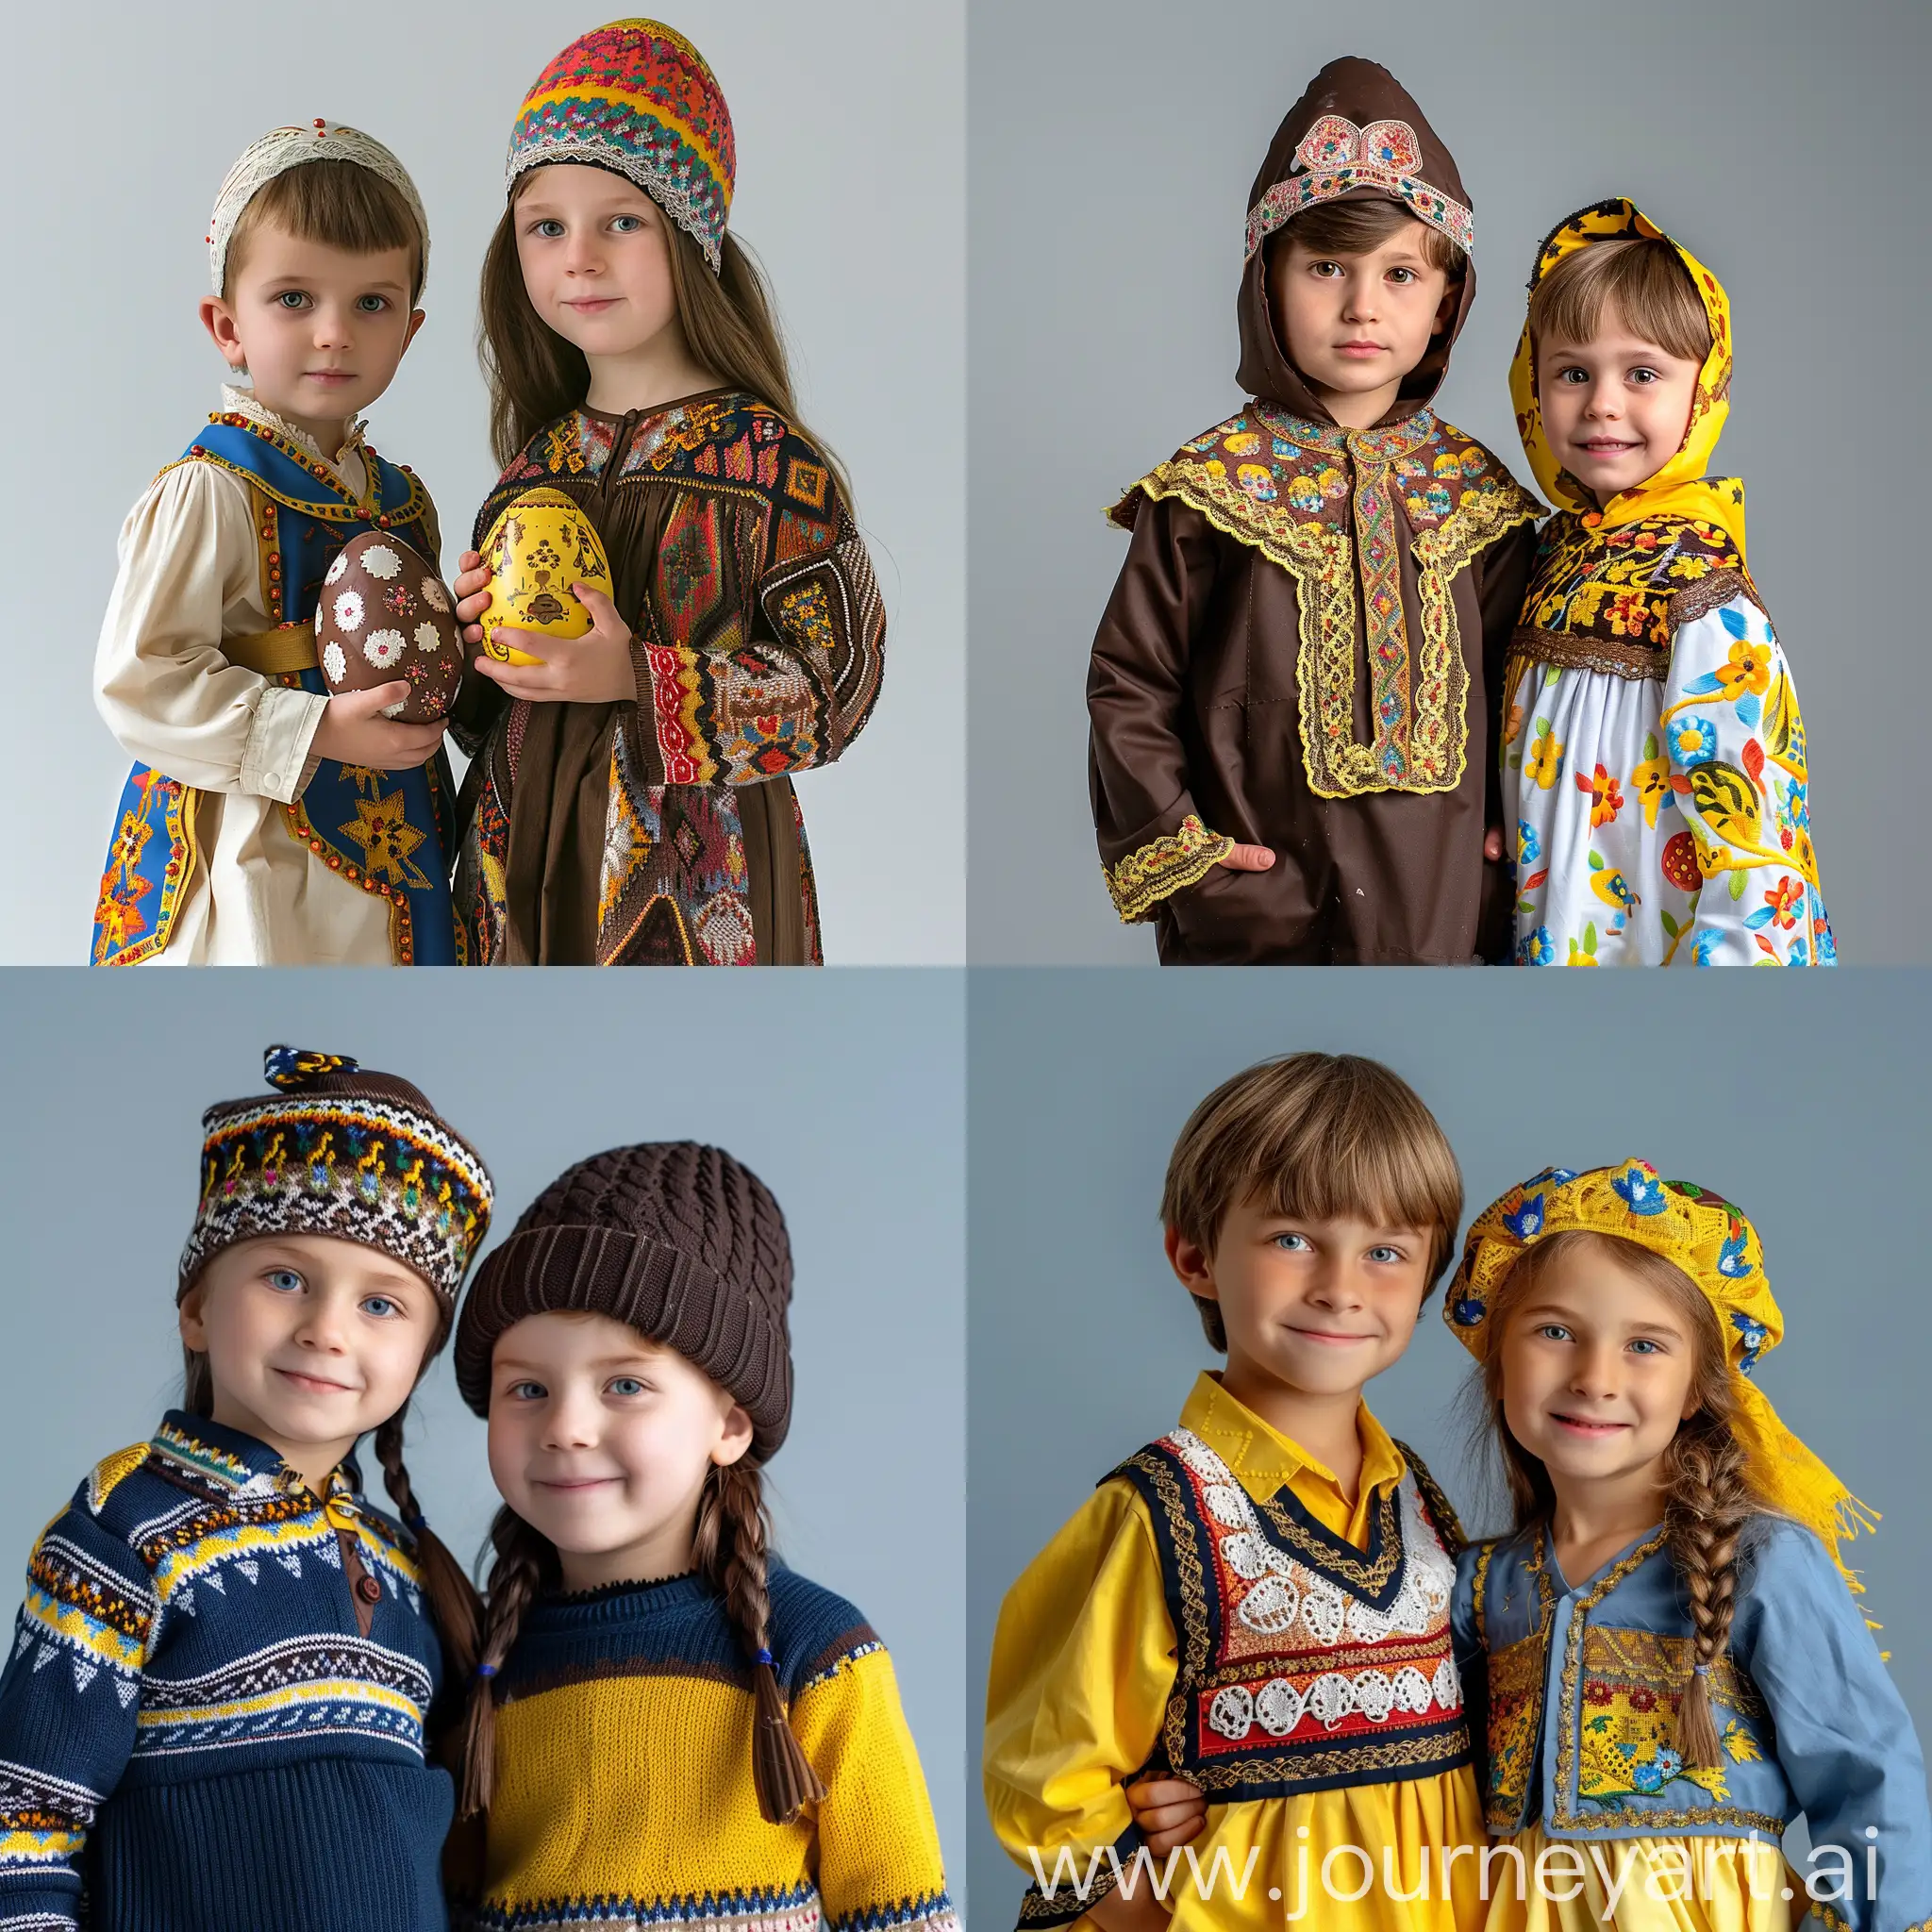 chocolate Easter eggs The background should plain, overall message to suport children in Ukraine , national Ukraine colors, boy and girl ukrain with national Ukraine clothing